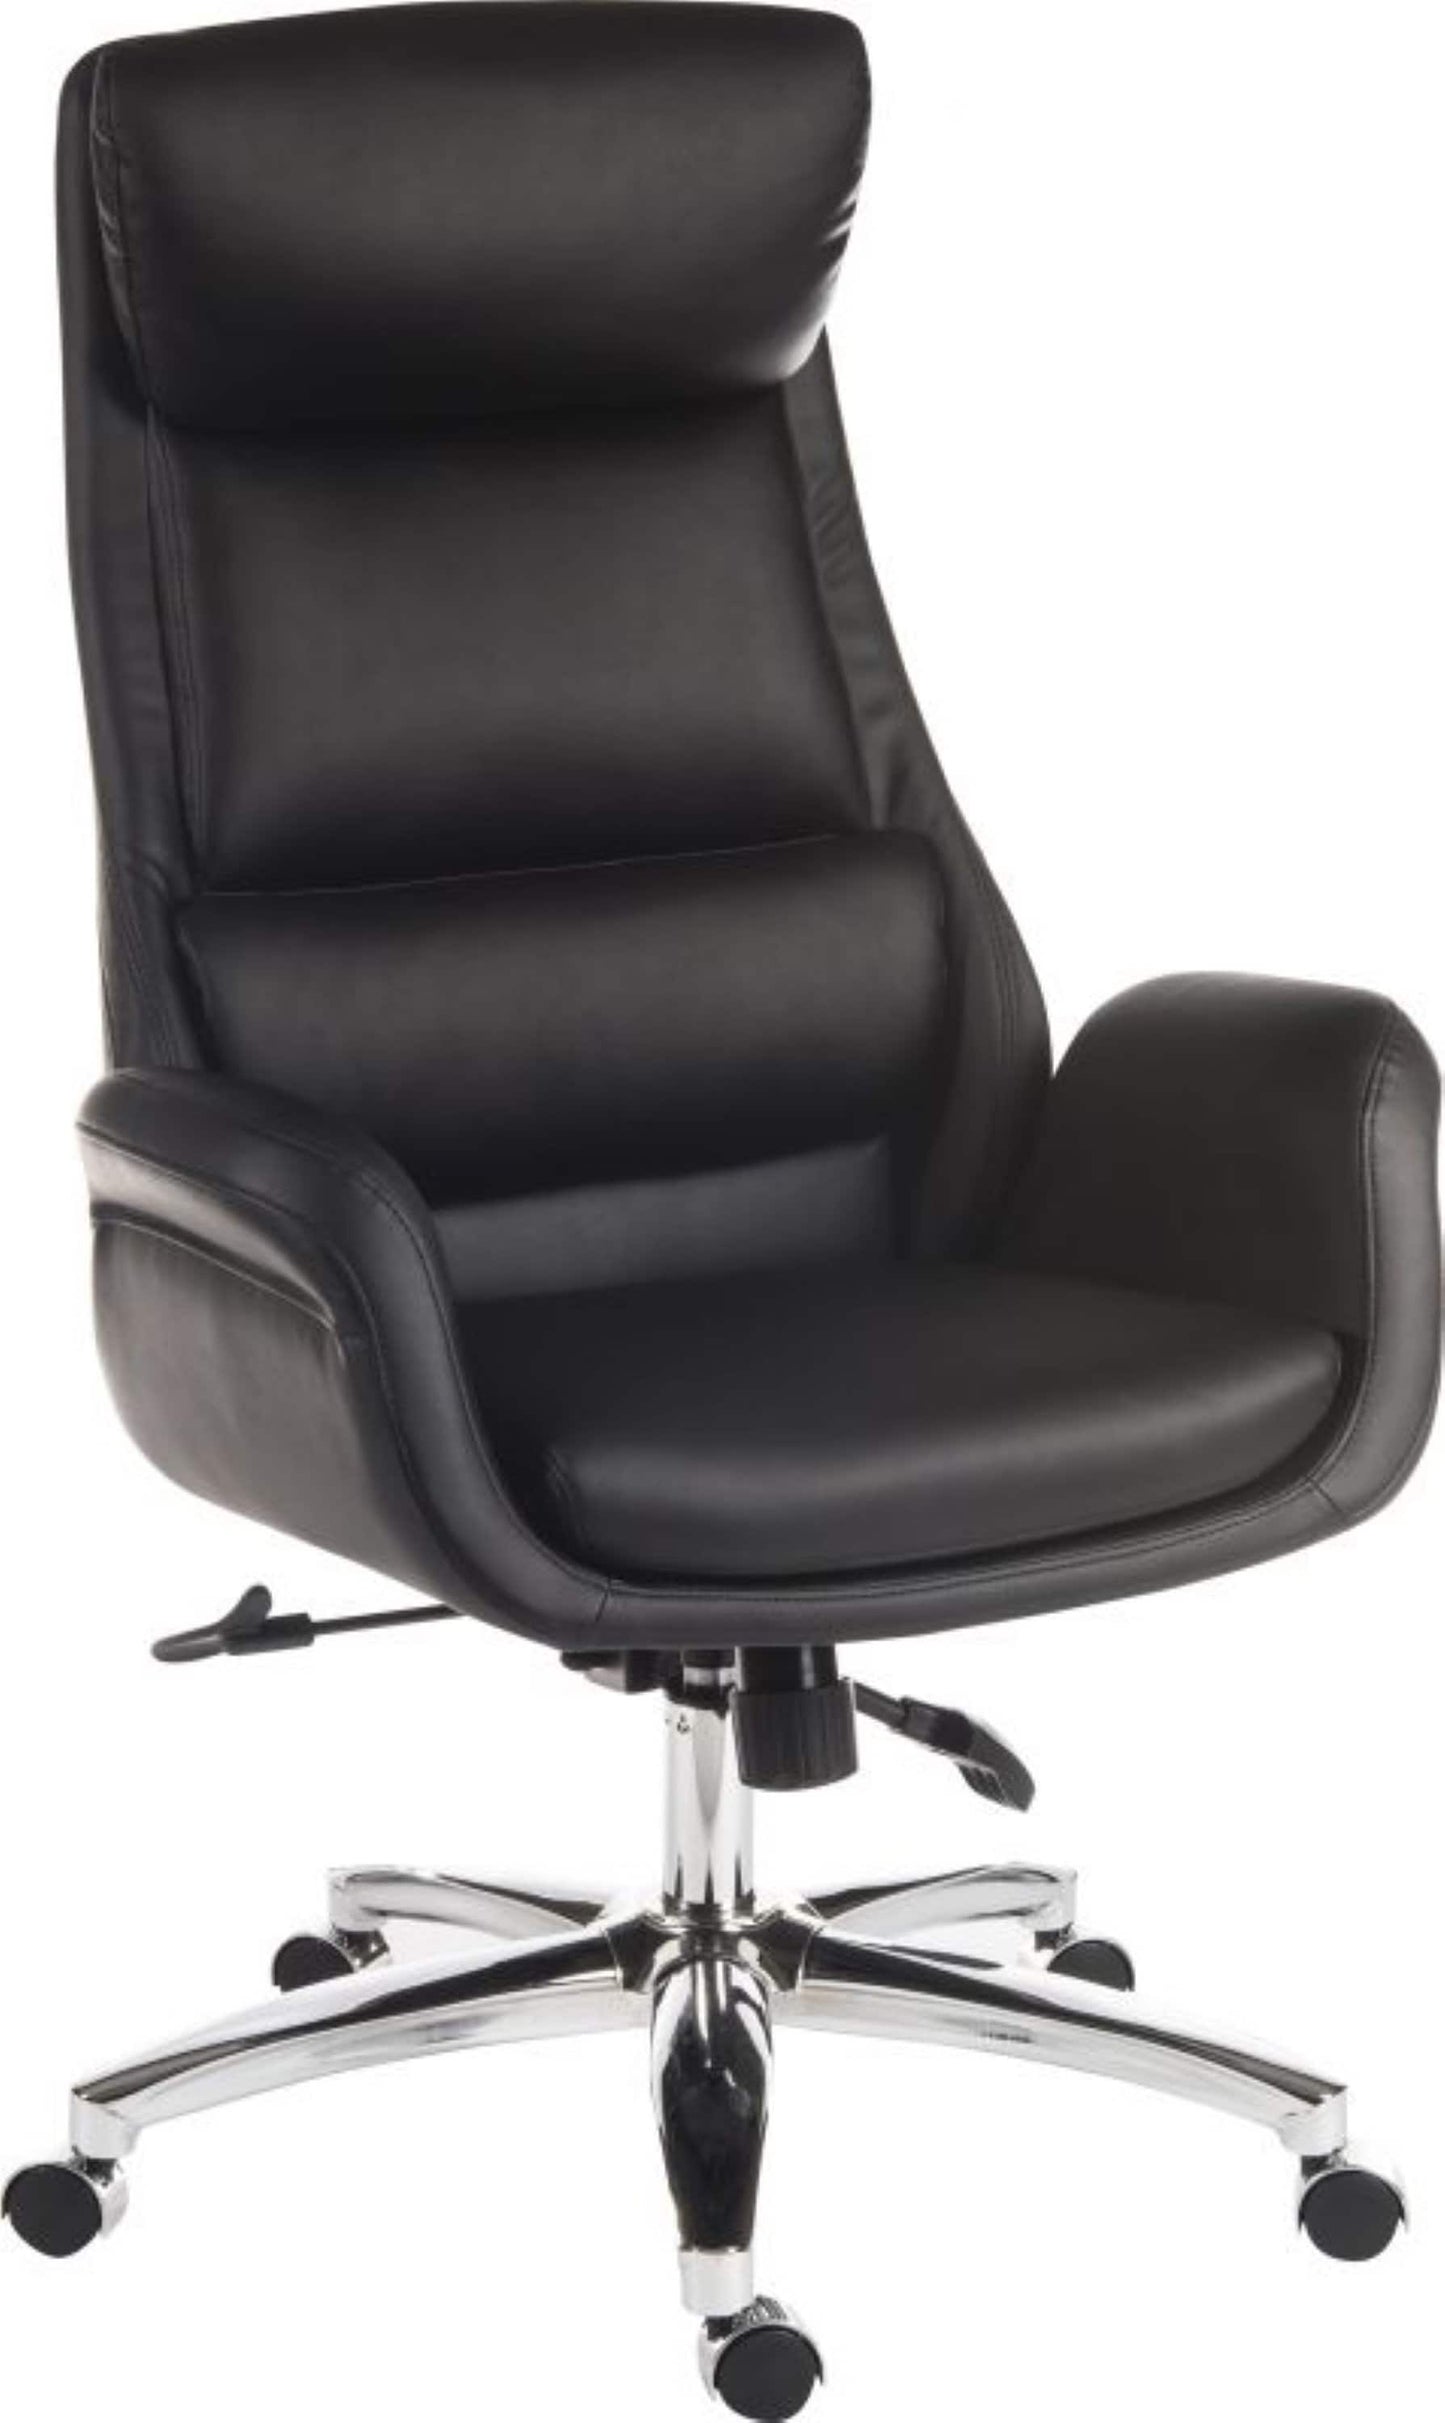 Luxury reclining executive chair in faux leather- highly padded